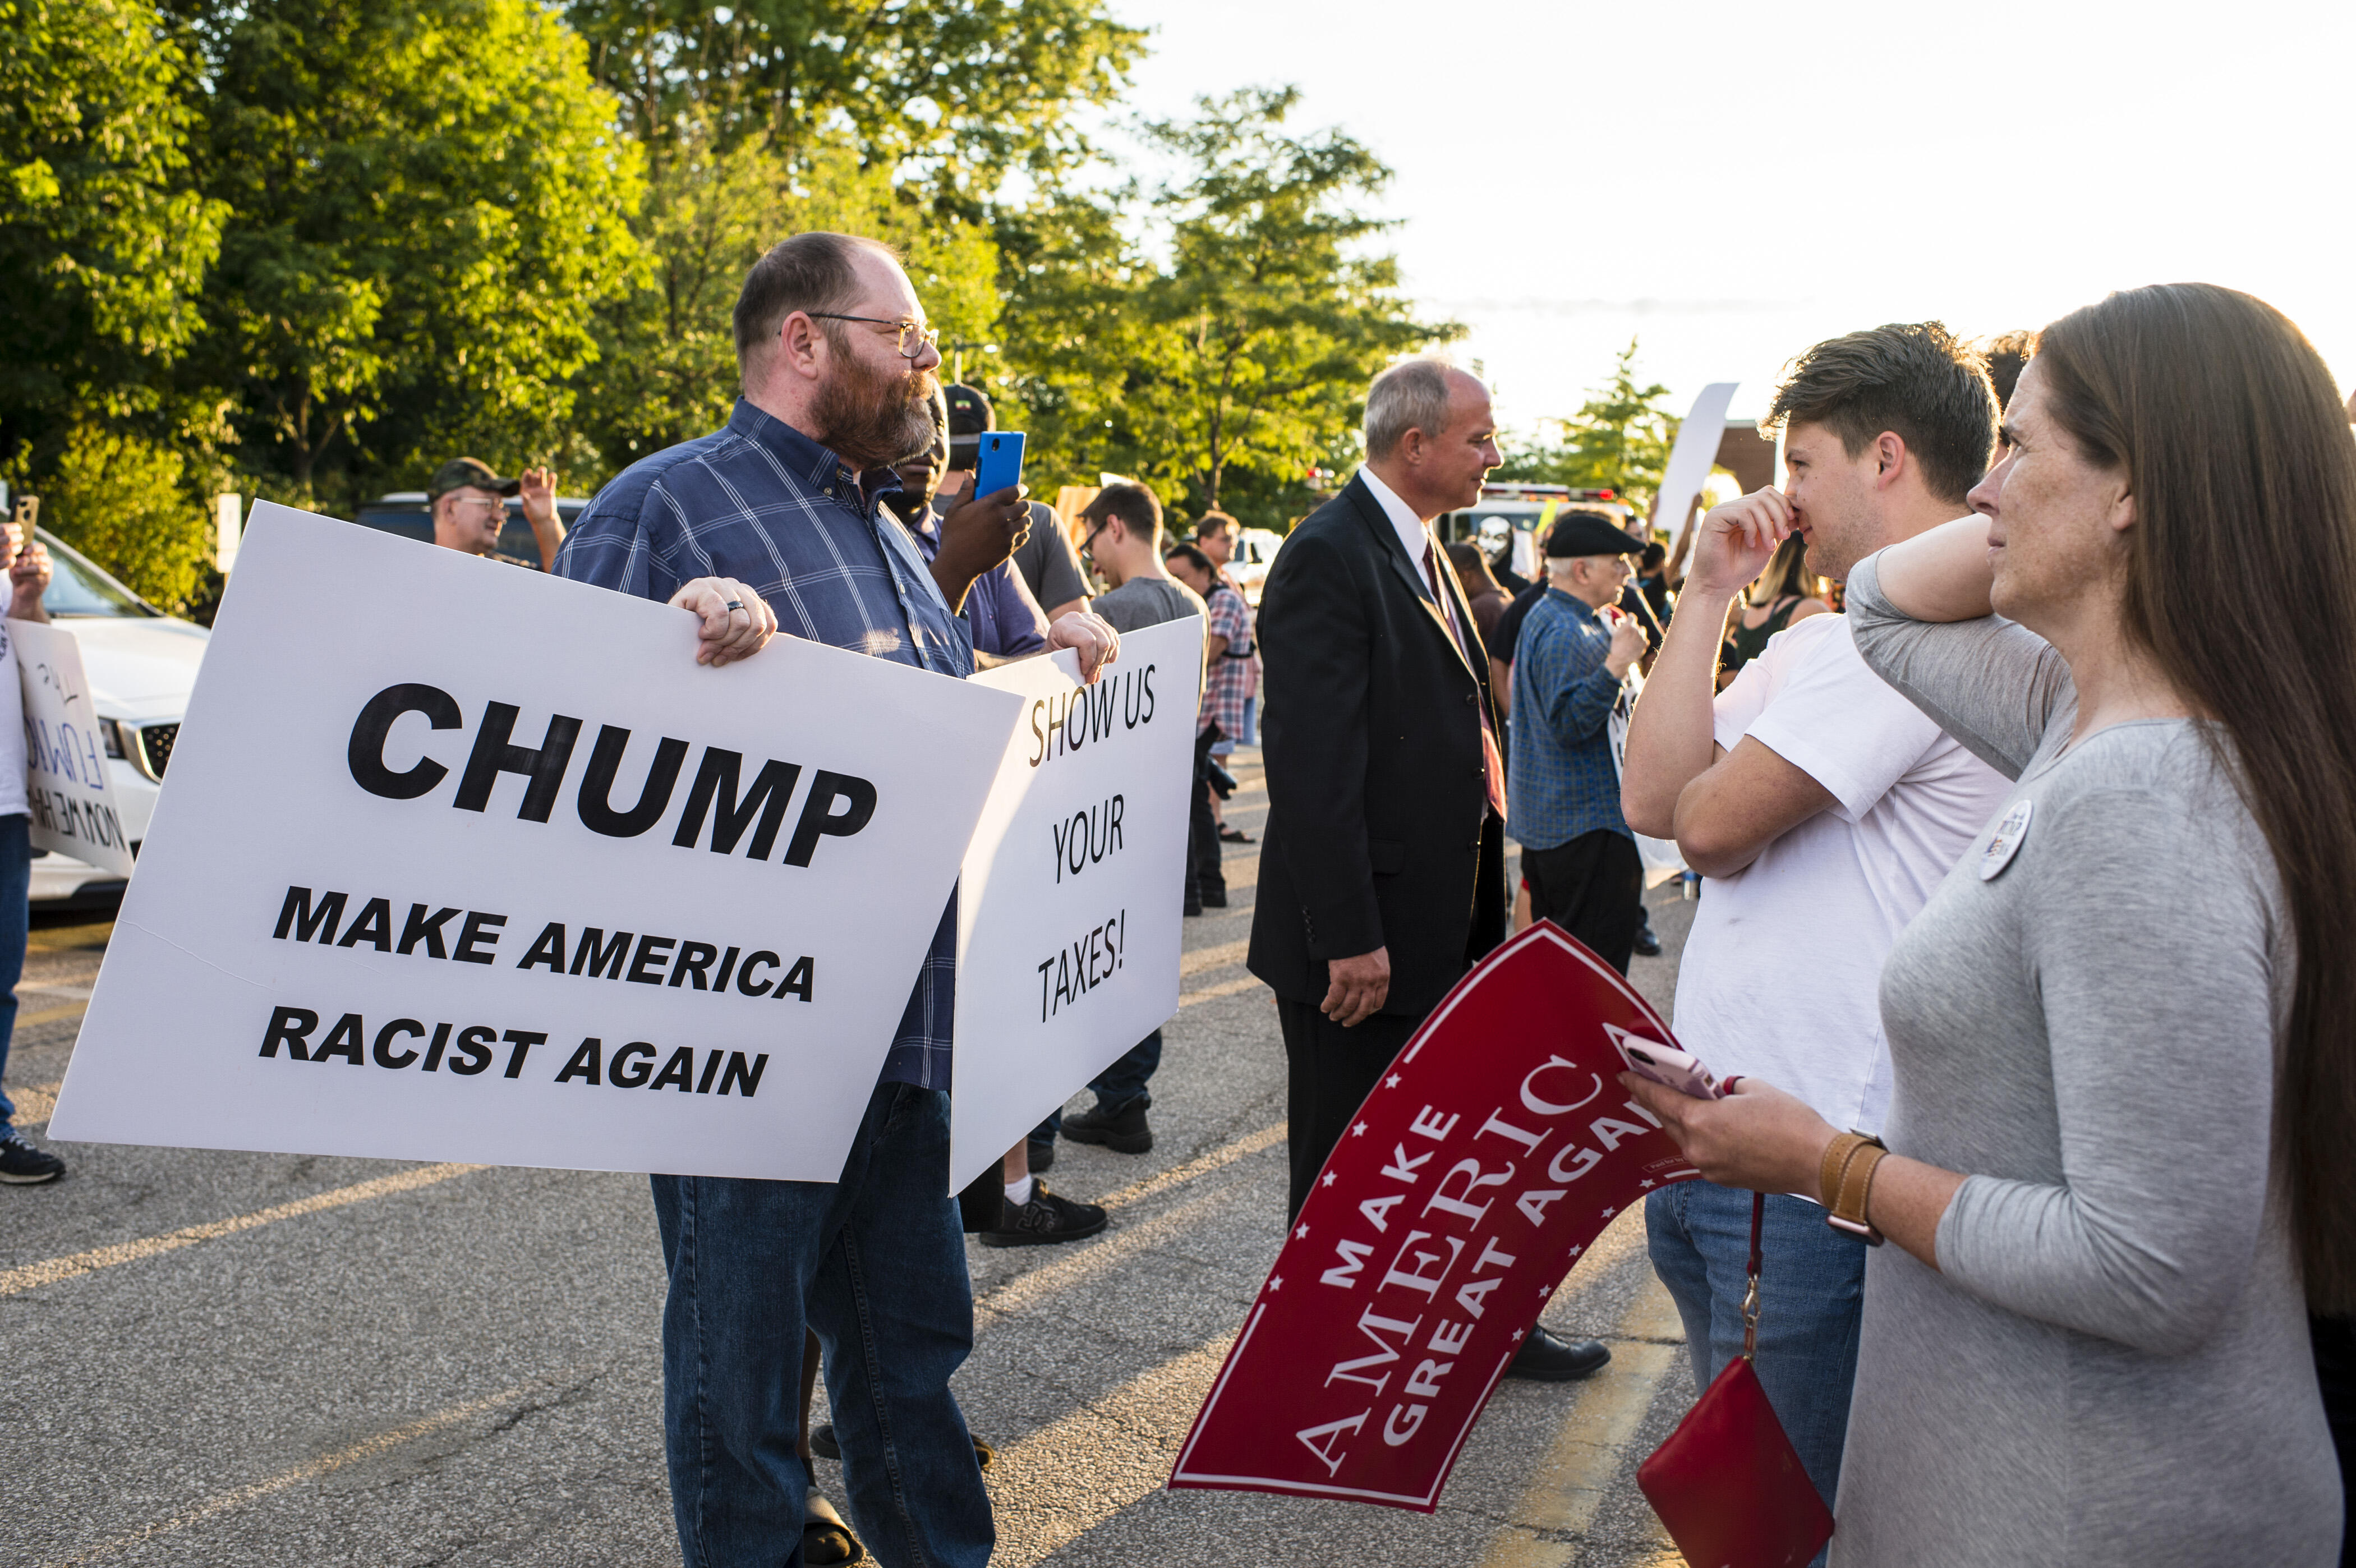 AKRON, OH - AUGUST 22: A Trump supporter (center-right) confronts a protestor (left) outside of a rally for US Republican Presidential candidate Donald Trump at the James A. Rhodes Arena on August 22, 2016 in Akron, Ohio.  Trump currently trails Democratic Presidential candidate Hillary Clinton in Ohio, a state which is critical to his election bid. (Photo by Angelo Merendino/Getty Images)